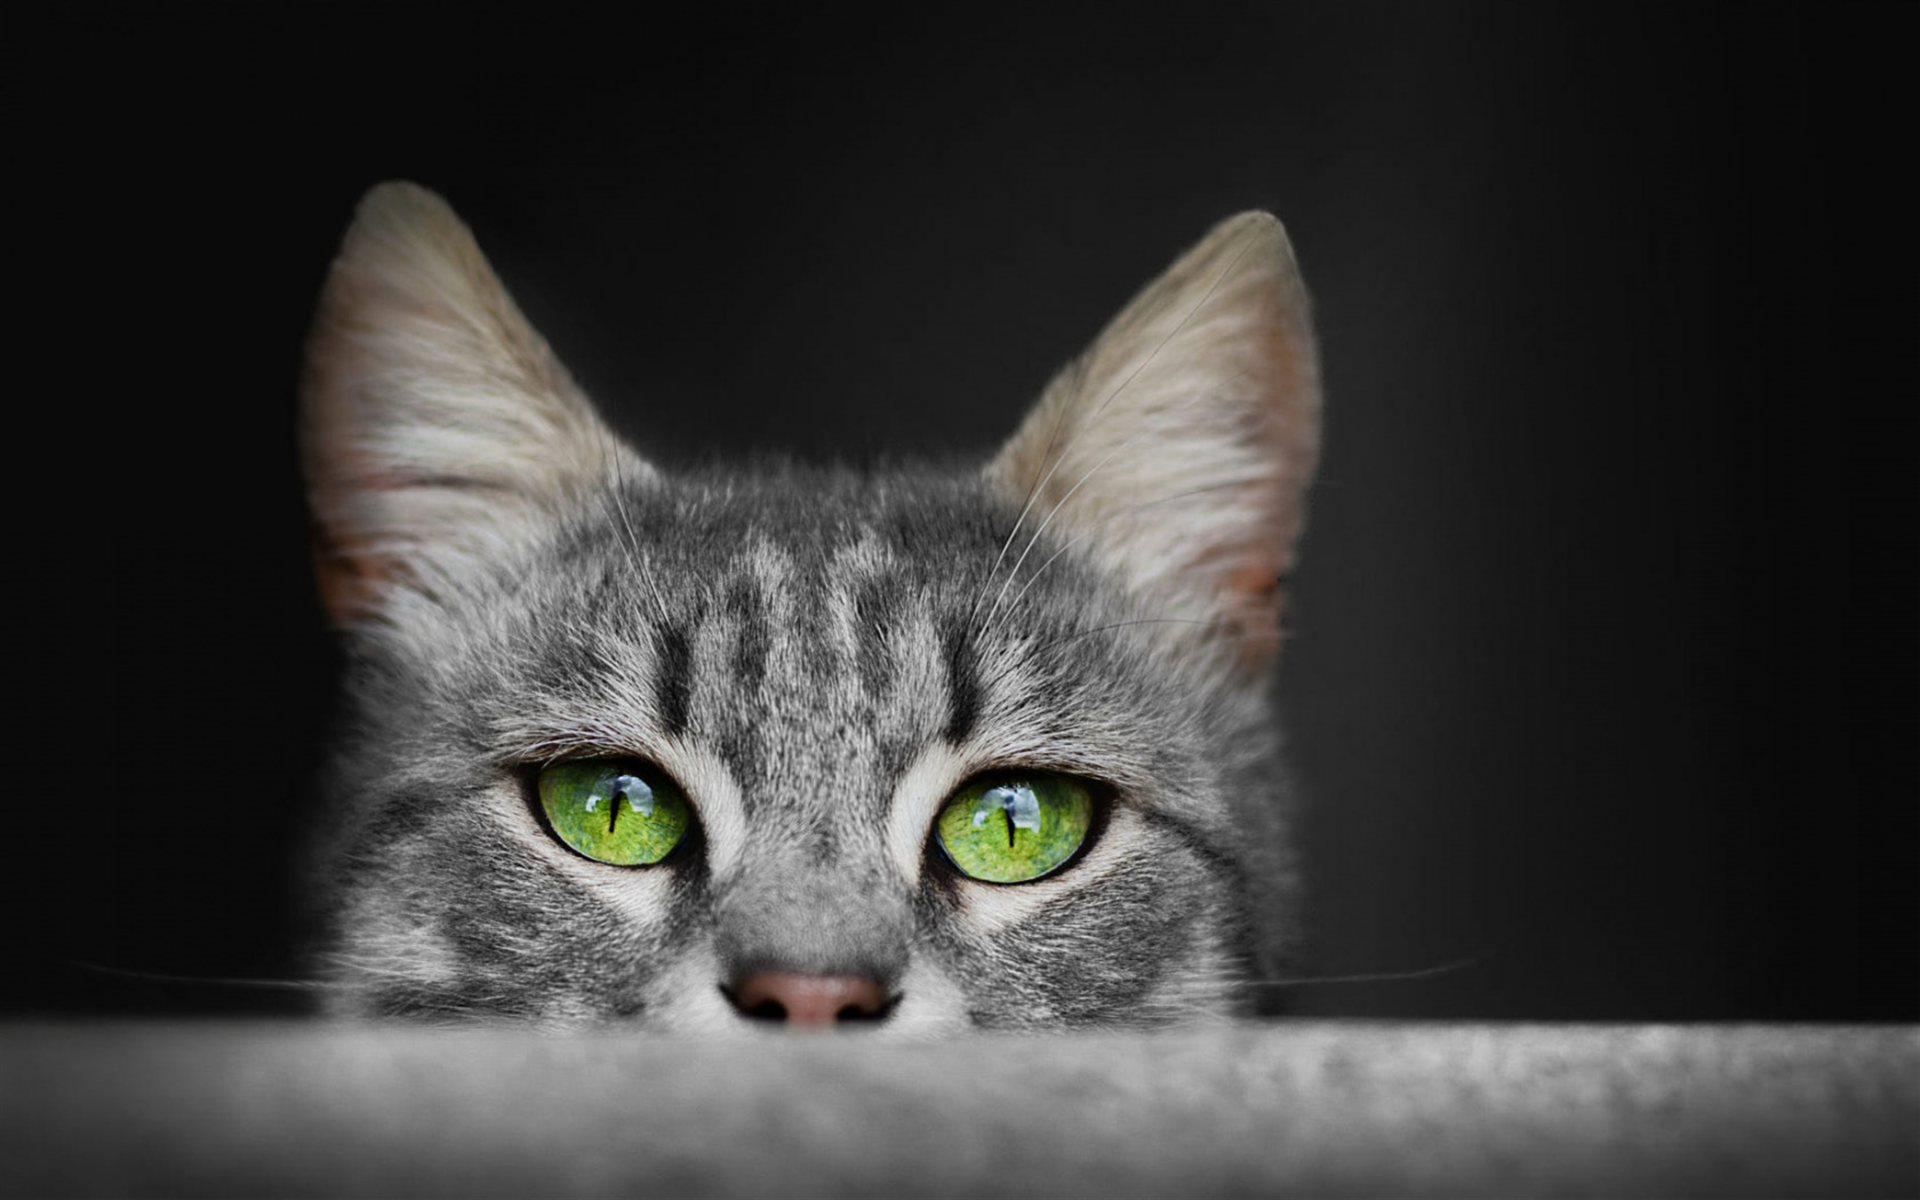 Download Wallpaper Gray Cat, Green Eyes, Long Ears, Cute Animals, American Short Haired Cat For Desktop With Resolution 1920x1200. High Quality HD Picture Wallpaper